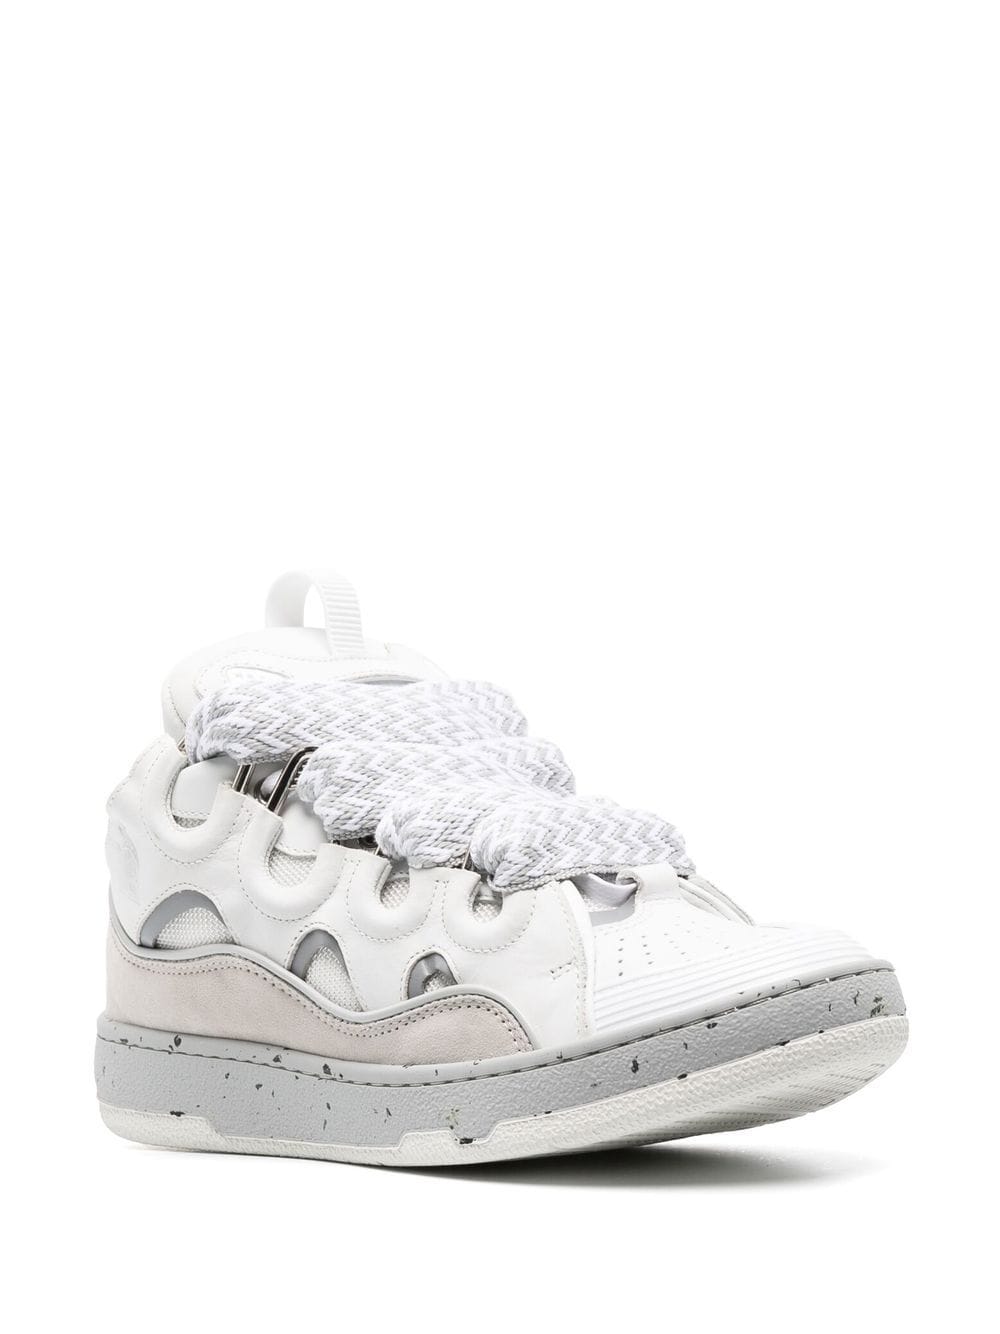 Lanvin Curb Panelled Sneakers - Farfetch